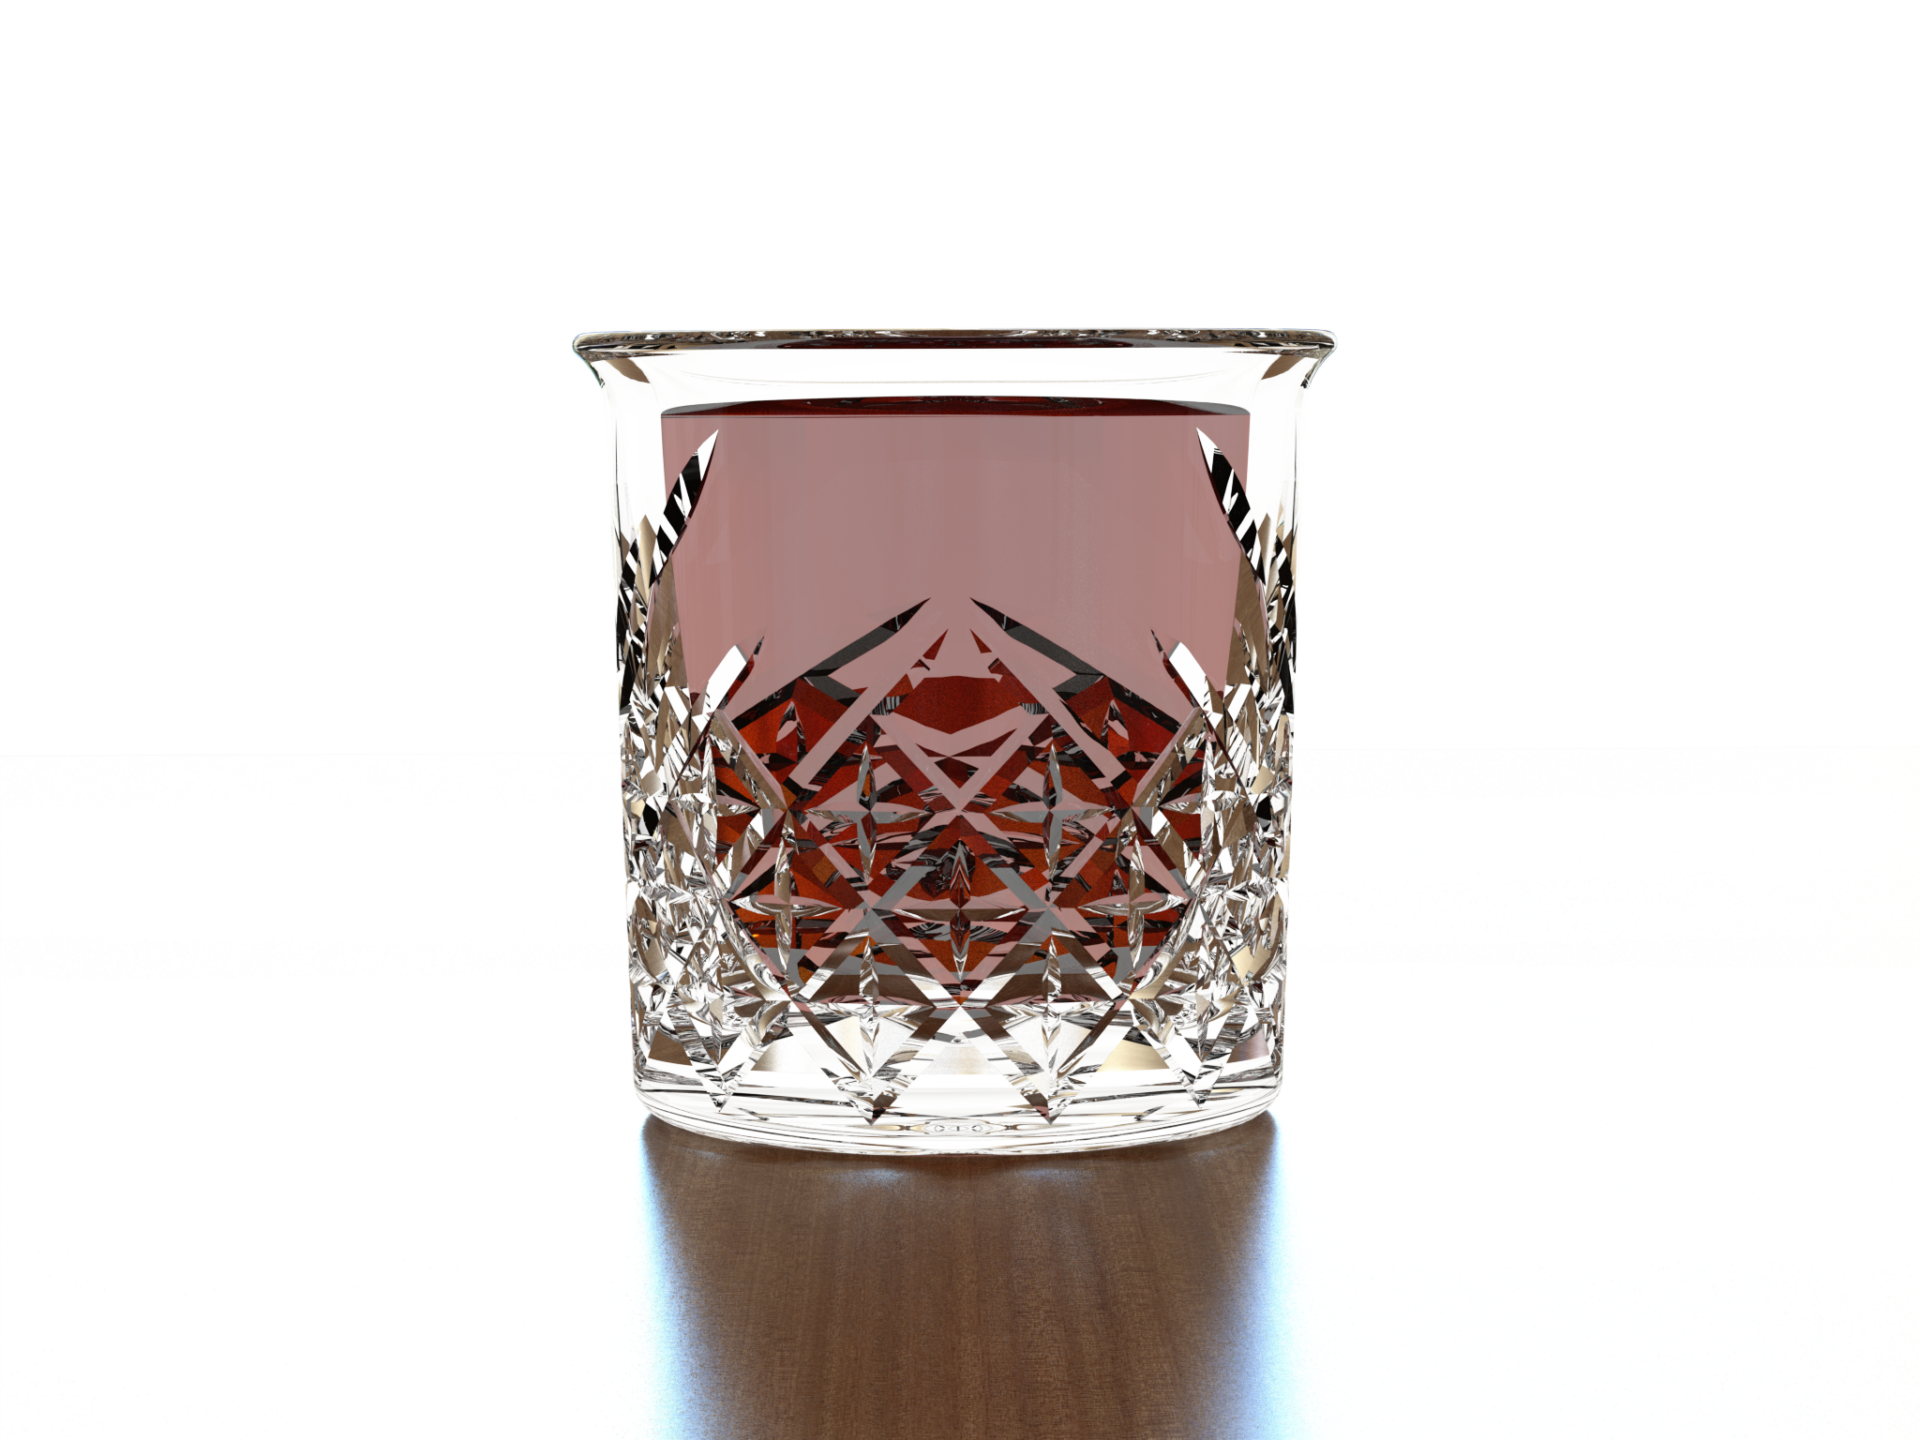 whiskey-cup-design-01